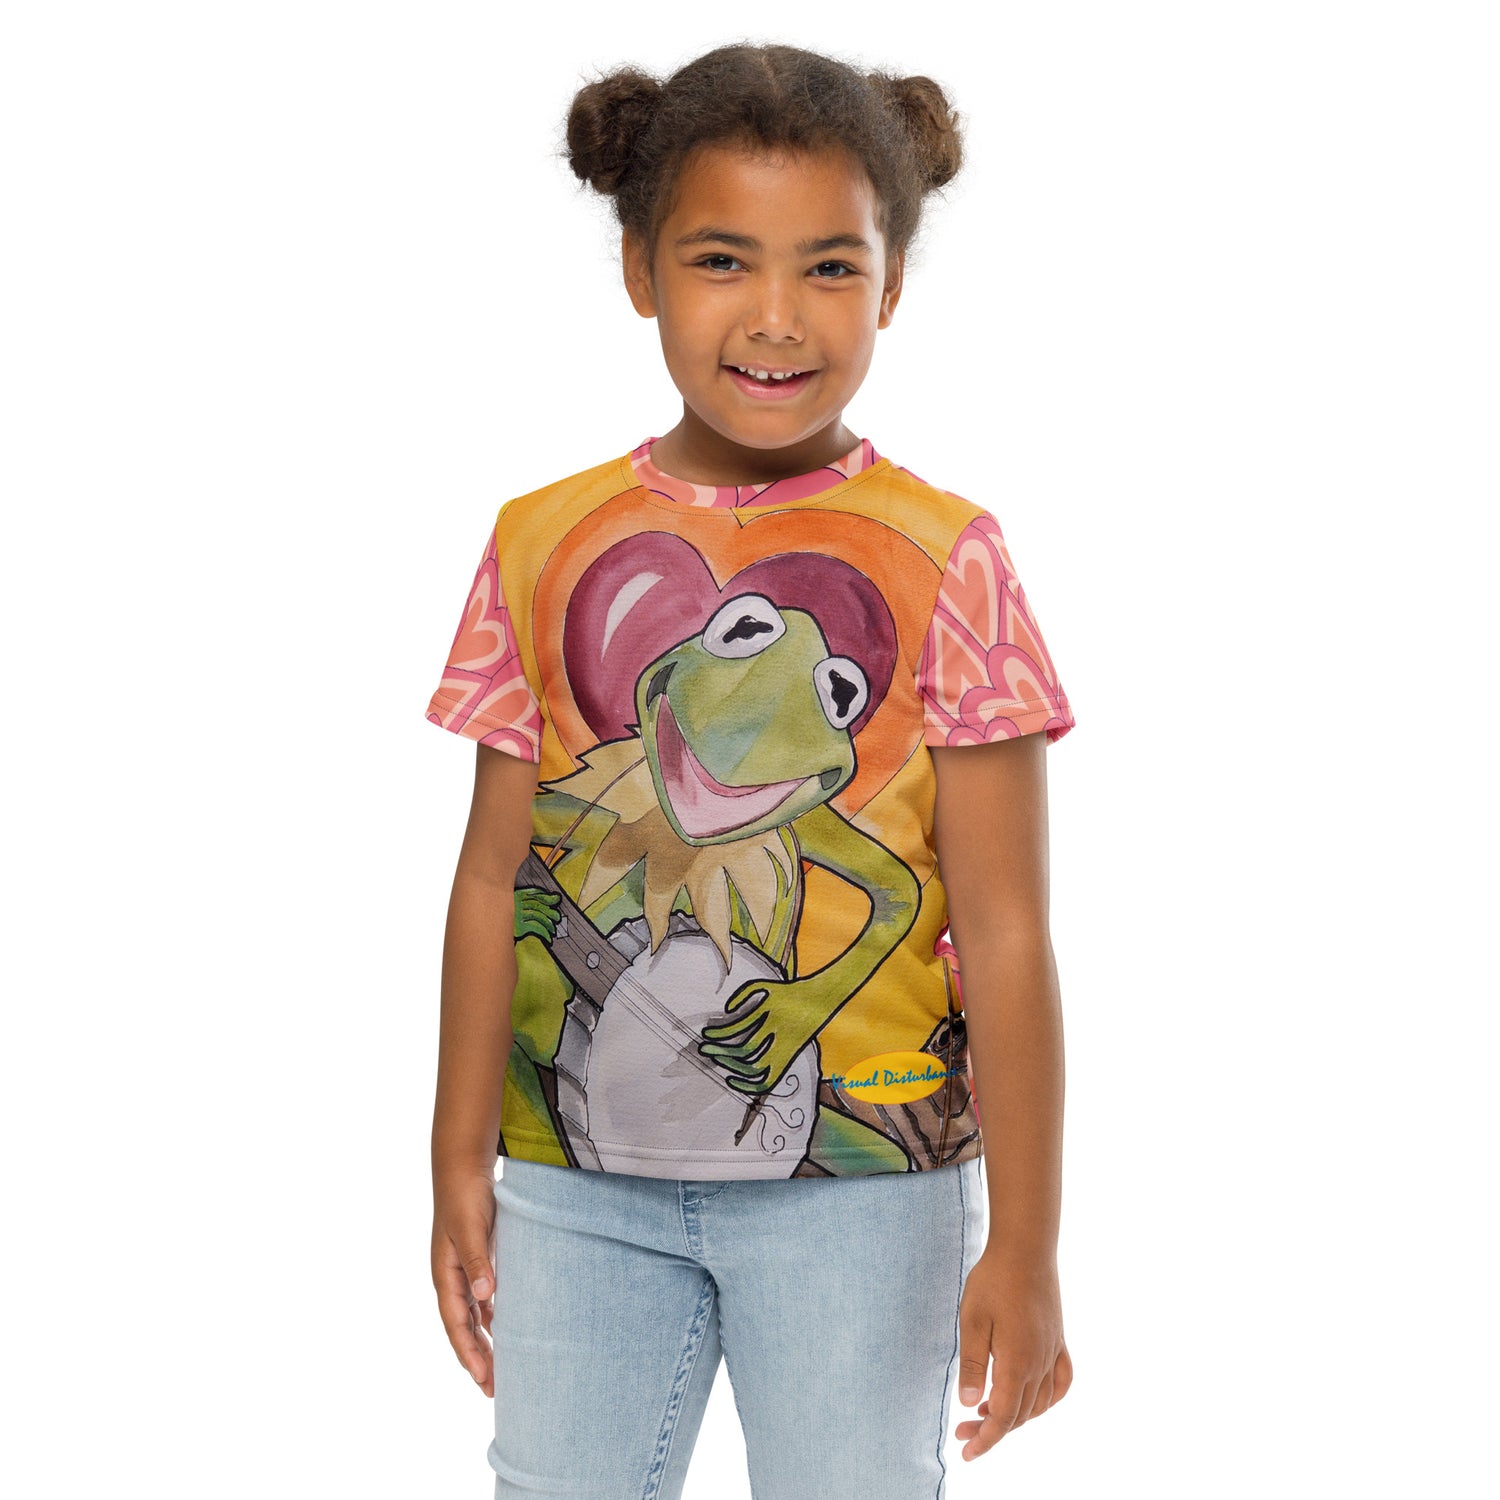 A young girl wearing a t-shirt with Kermit the frog playing a banjo.